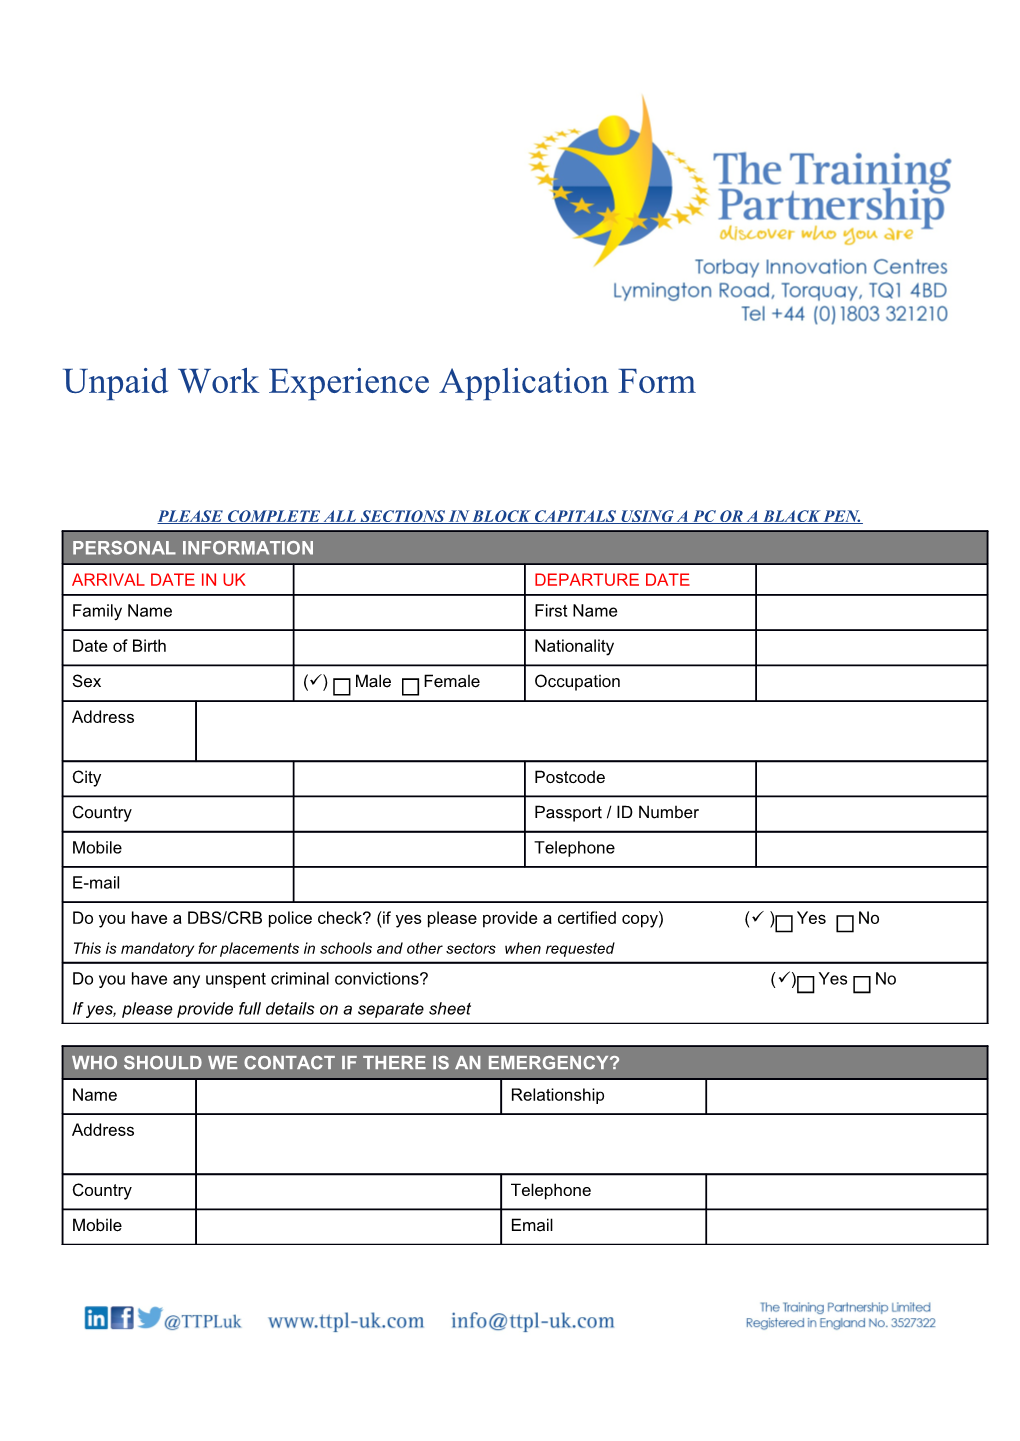 Unpaid Work Experience Application Form